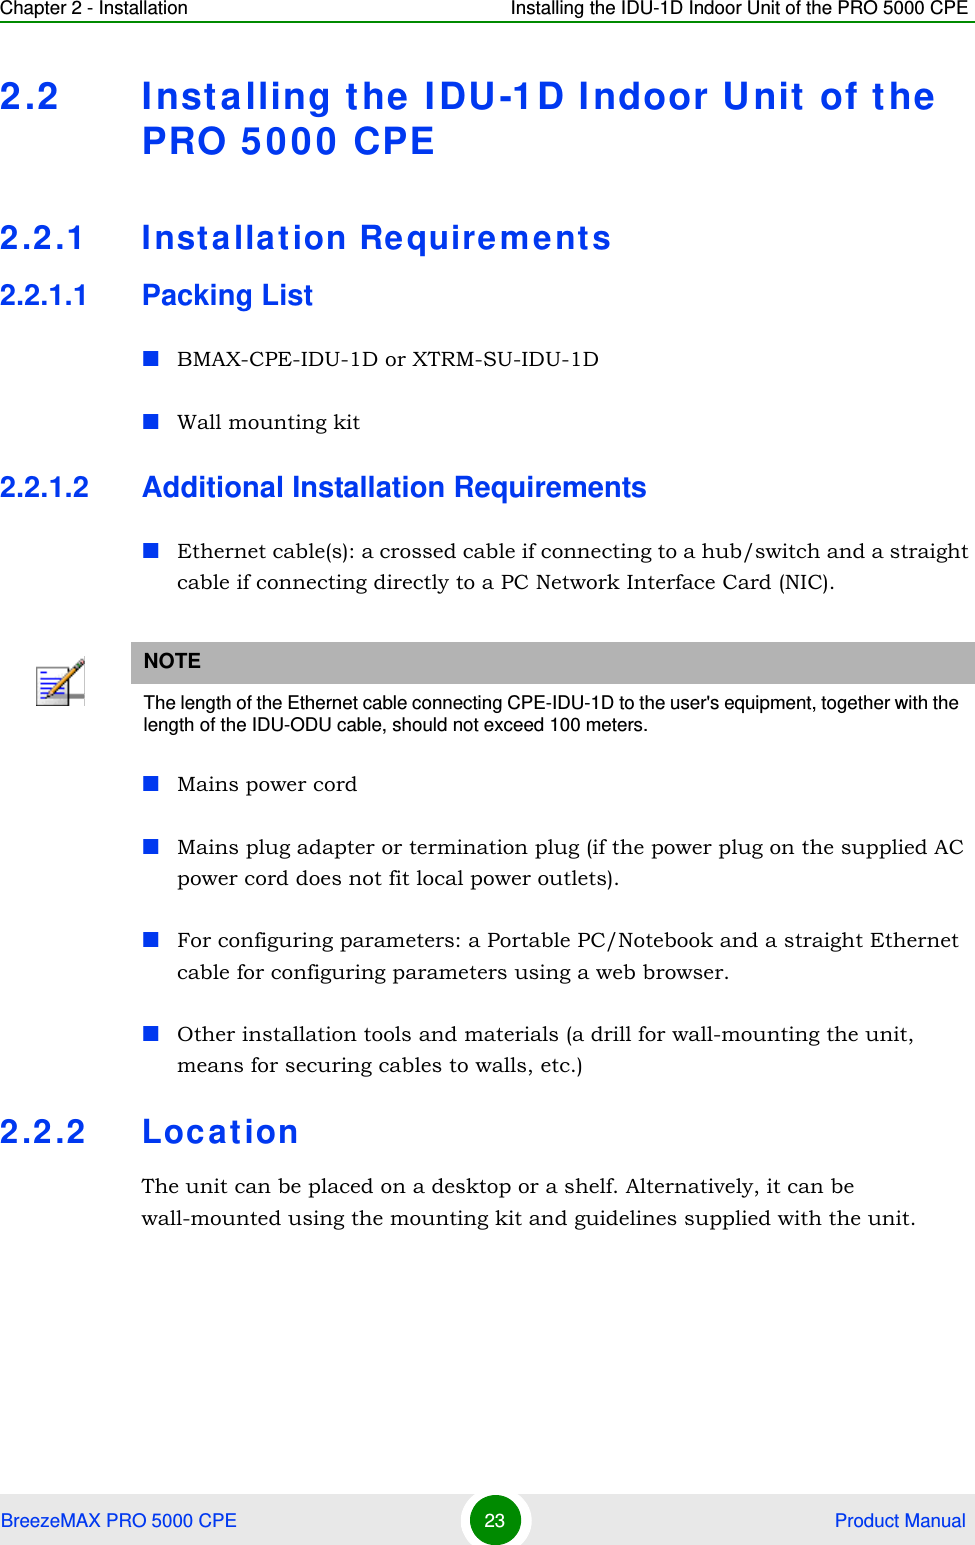 Chapter 2 - Installation Installing the IDU-1D Indoor Unit of the PRO 5000 CPEBreezeMAX PRO 5000 CPE 23  Product Manual2.2 Installing the IDU-1D Indoor Unit of the PRO 5000 CPE2.2.1 Installation Requirements2.2.1.1 Packing ListBMAX-CPE-IDU-1D or XTRM-SU-IDU-1DWall mounting kit 2.2.1.2 Additional Installation RequirementsEthernet cable(s): a crossed cable if connecting to a hub/switch and a straight cable if connecting directly to a PC Network Interface Card (NIC).Mains power cordMains plug adapter or termination plug (if the power plug on the supplied AC power cord does not fit local power outlets).For configuring parameters: a Portable PC/Notebook and a straight Ethernet cable for configuring parameters using a web browser.Other installation tools and materials (a drill for wall-mounting the unit, means for securing cables to walls, etc.)2.2.2 LocationThe unit can be placed on a desktop or a shelf. Alternatively, it can be wall-mounted using the mounting kit and guidelines supplied with the unit.NOTEThe length of the Ethernet cable connecting CPE-IDU-1D to the user&apos;s equipment, together with the length of the IDU-ODU cable, should not exceed 100 meters.